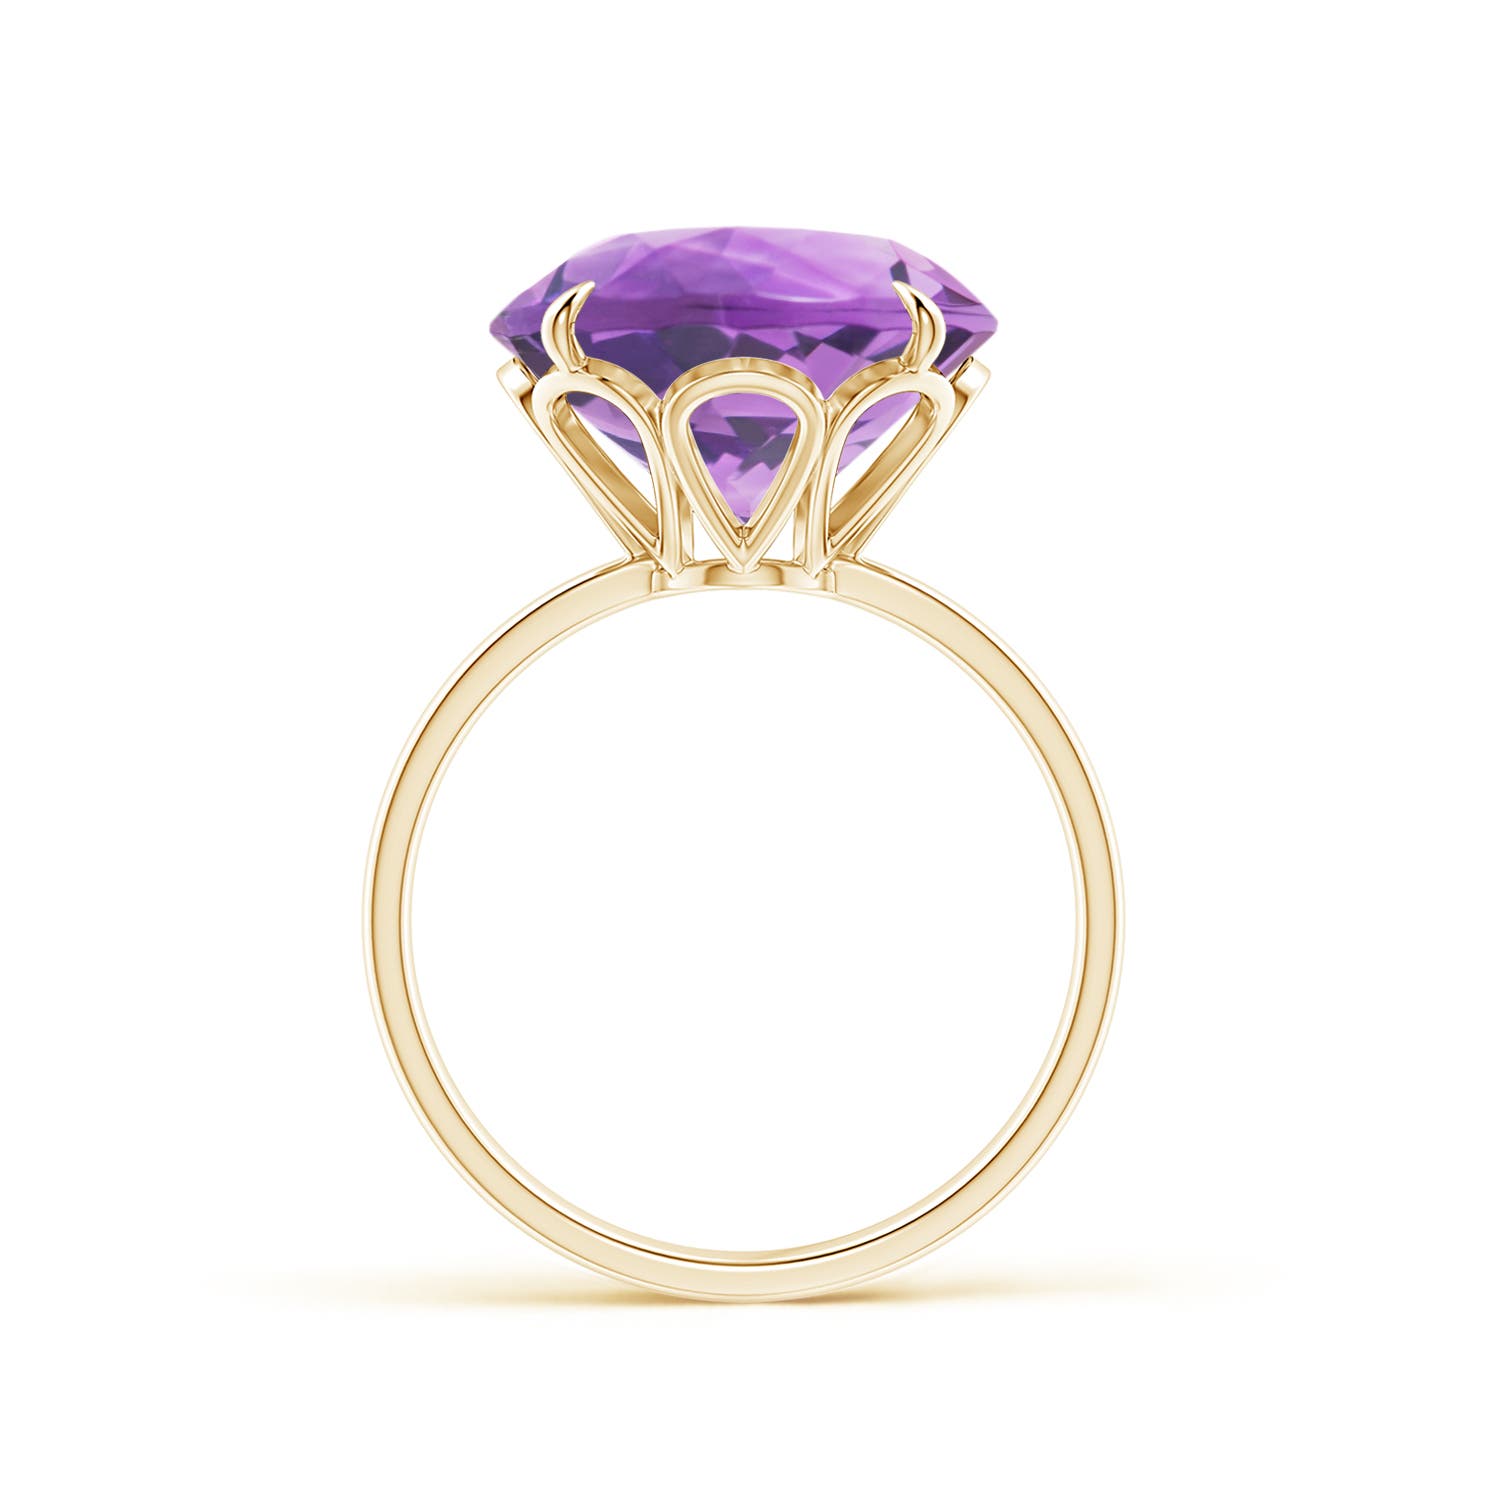 A- Amethyst / 7.2 CT / 14 KT Yellow Gold